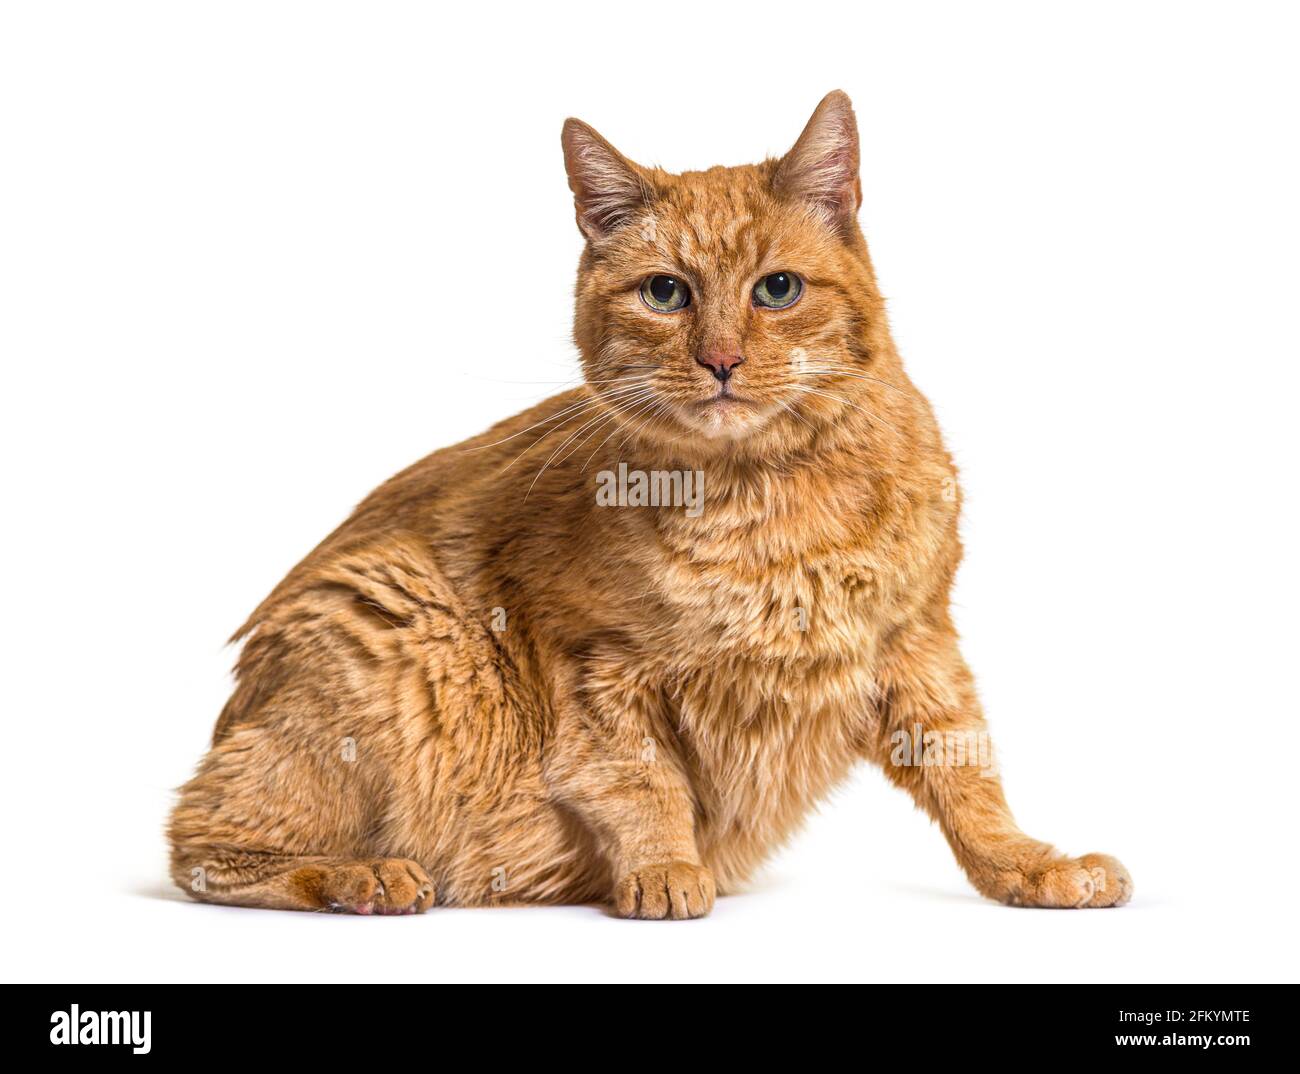 Very old ginger cat with lentigo on noise and lips Stock Photo